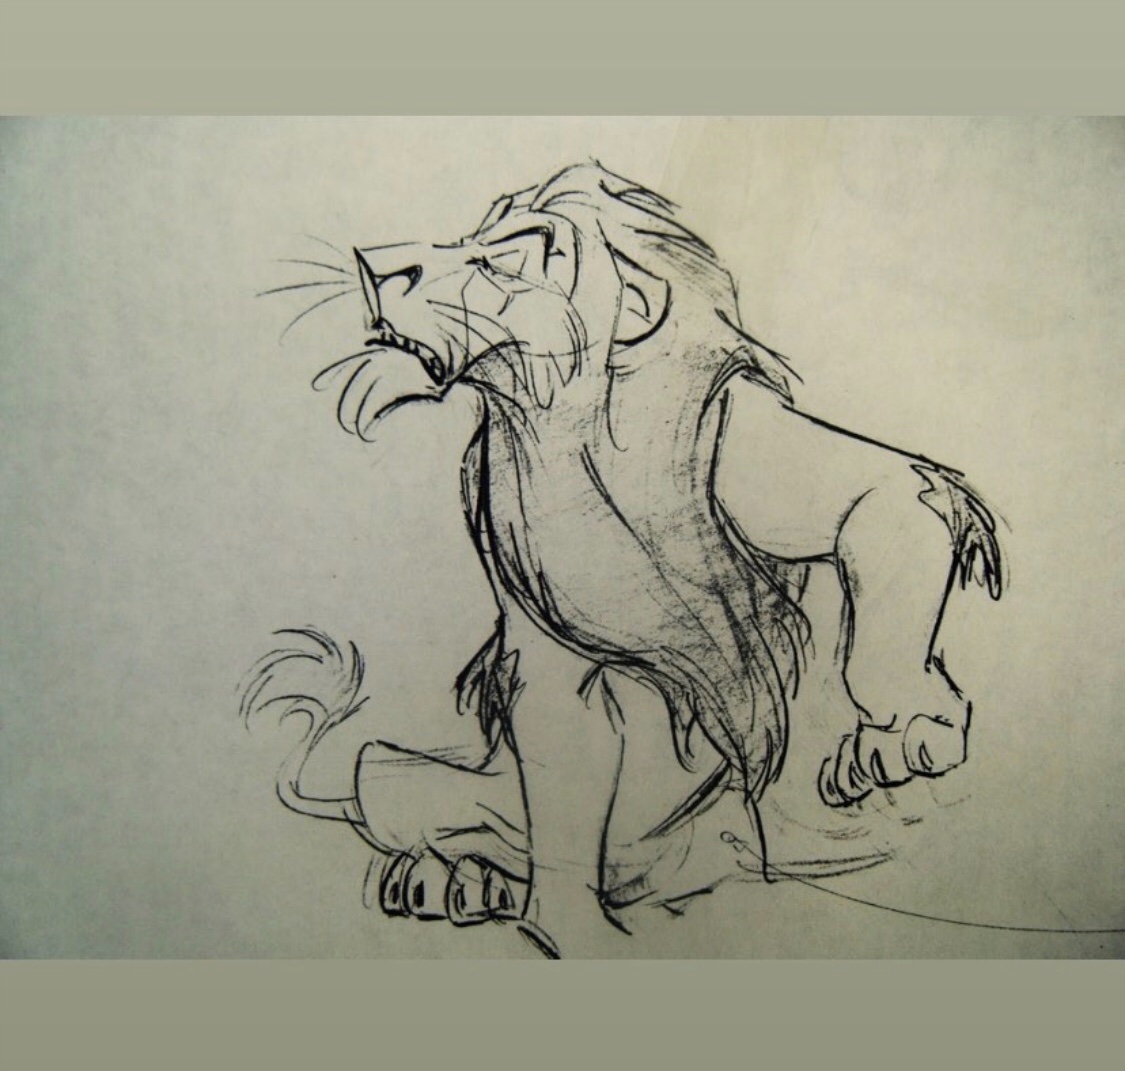 “Detail is not everything” is often repeated by modern art defenders. But most modern artists lack the technical skill to build the ~soul~ of a piece. Here is some concept art from Lion King that although not perfect in detail, are emotionally and functionally brilliant.